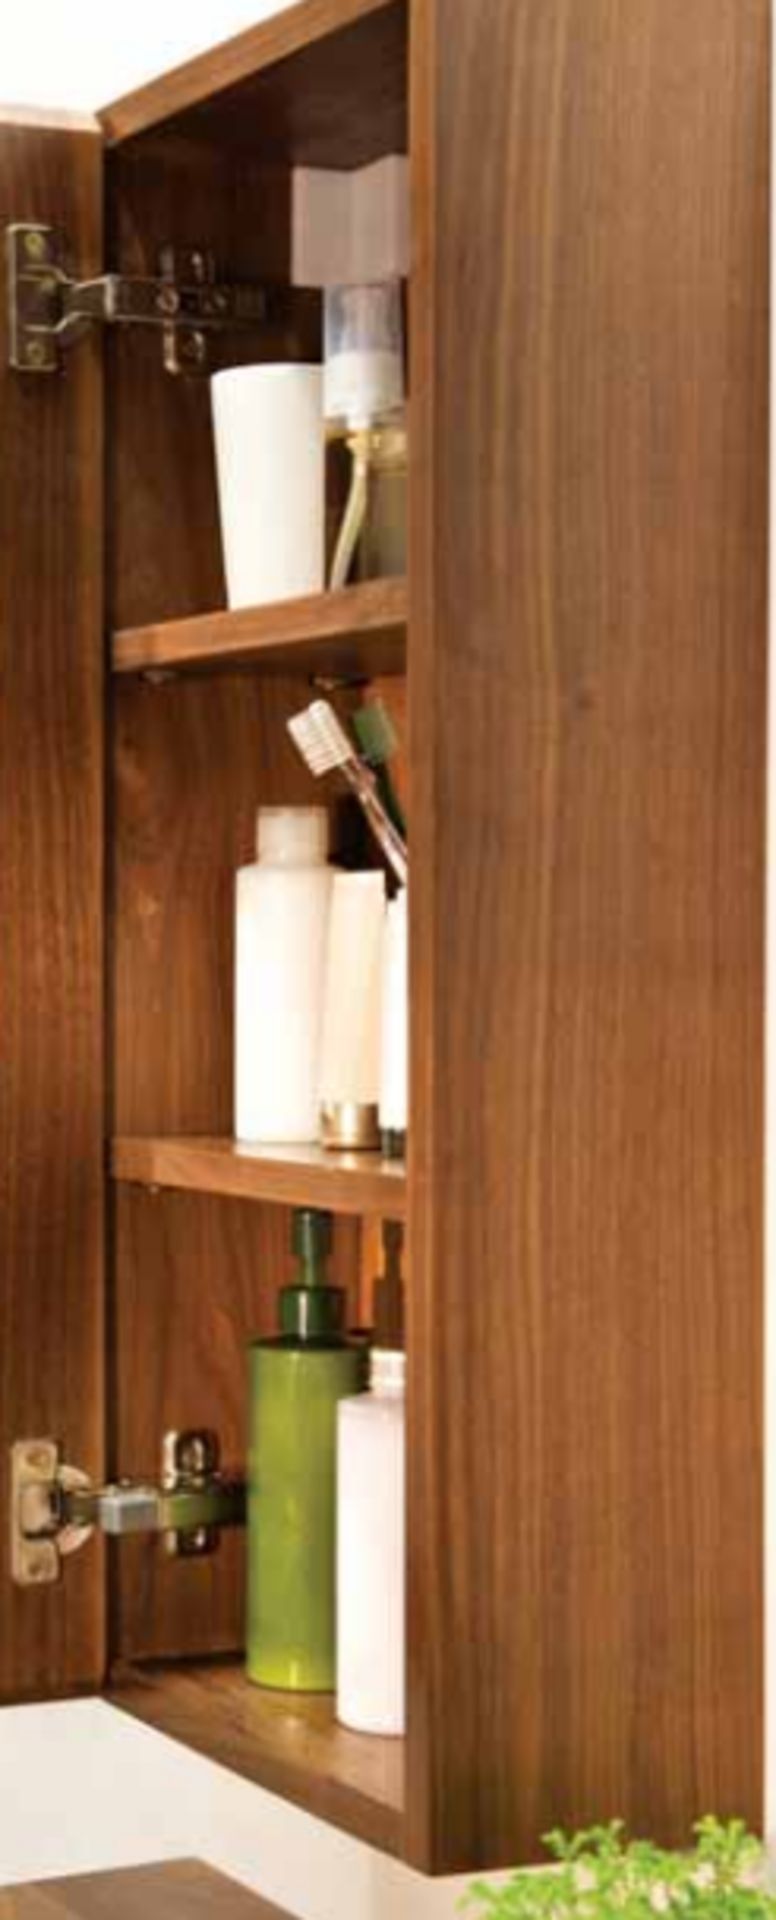 1 x Stonearth 300mm Wall Mounted Bathroom Storage Cabinet - American Solid Walnut - RRP £300 - Image 6 of 11